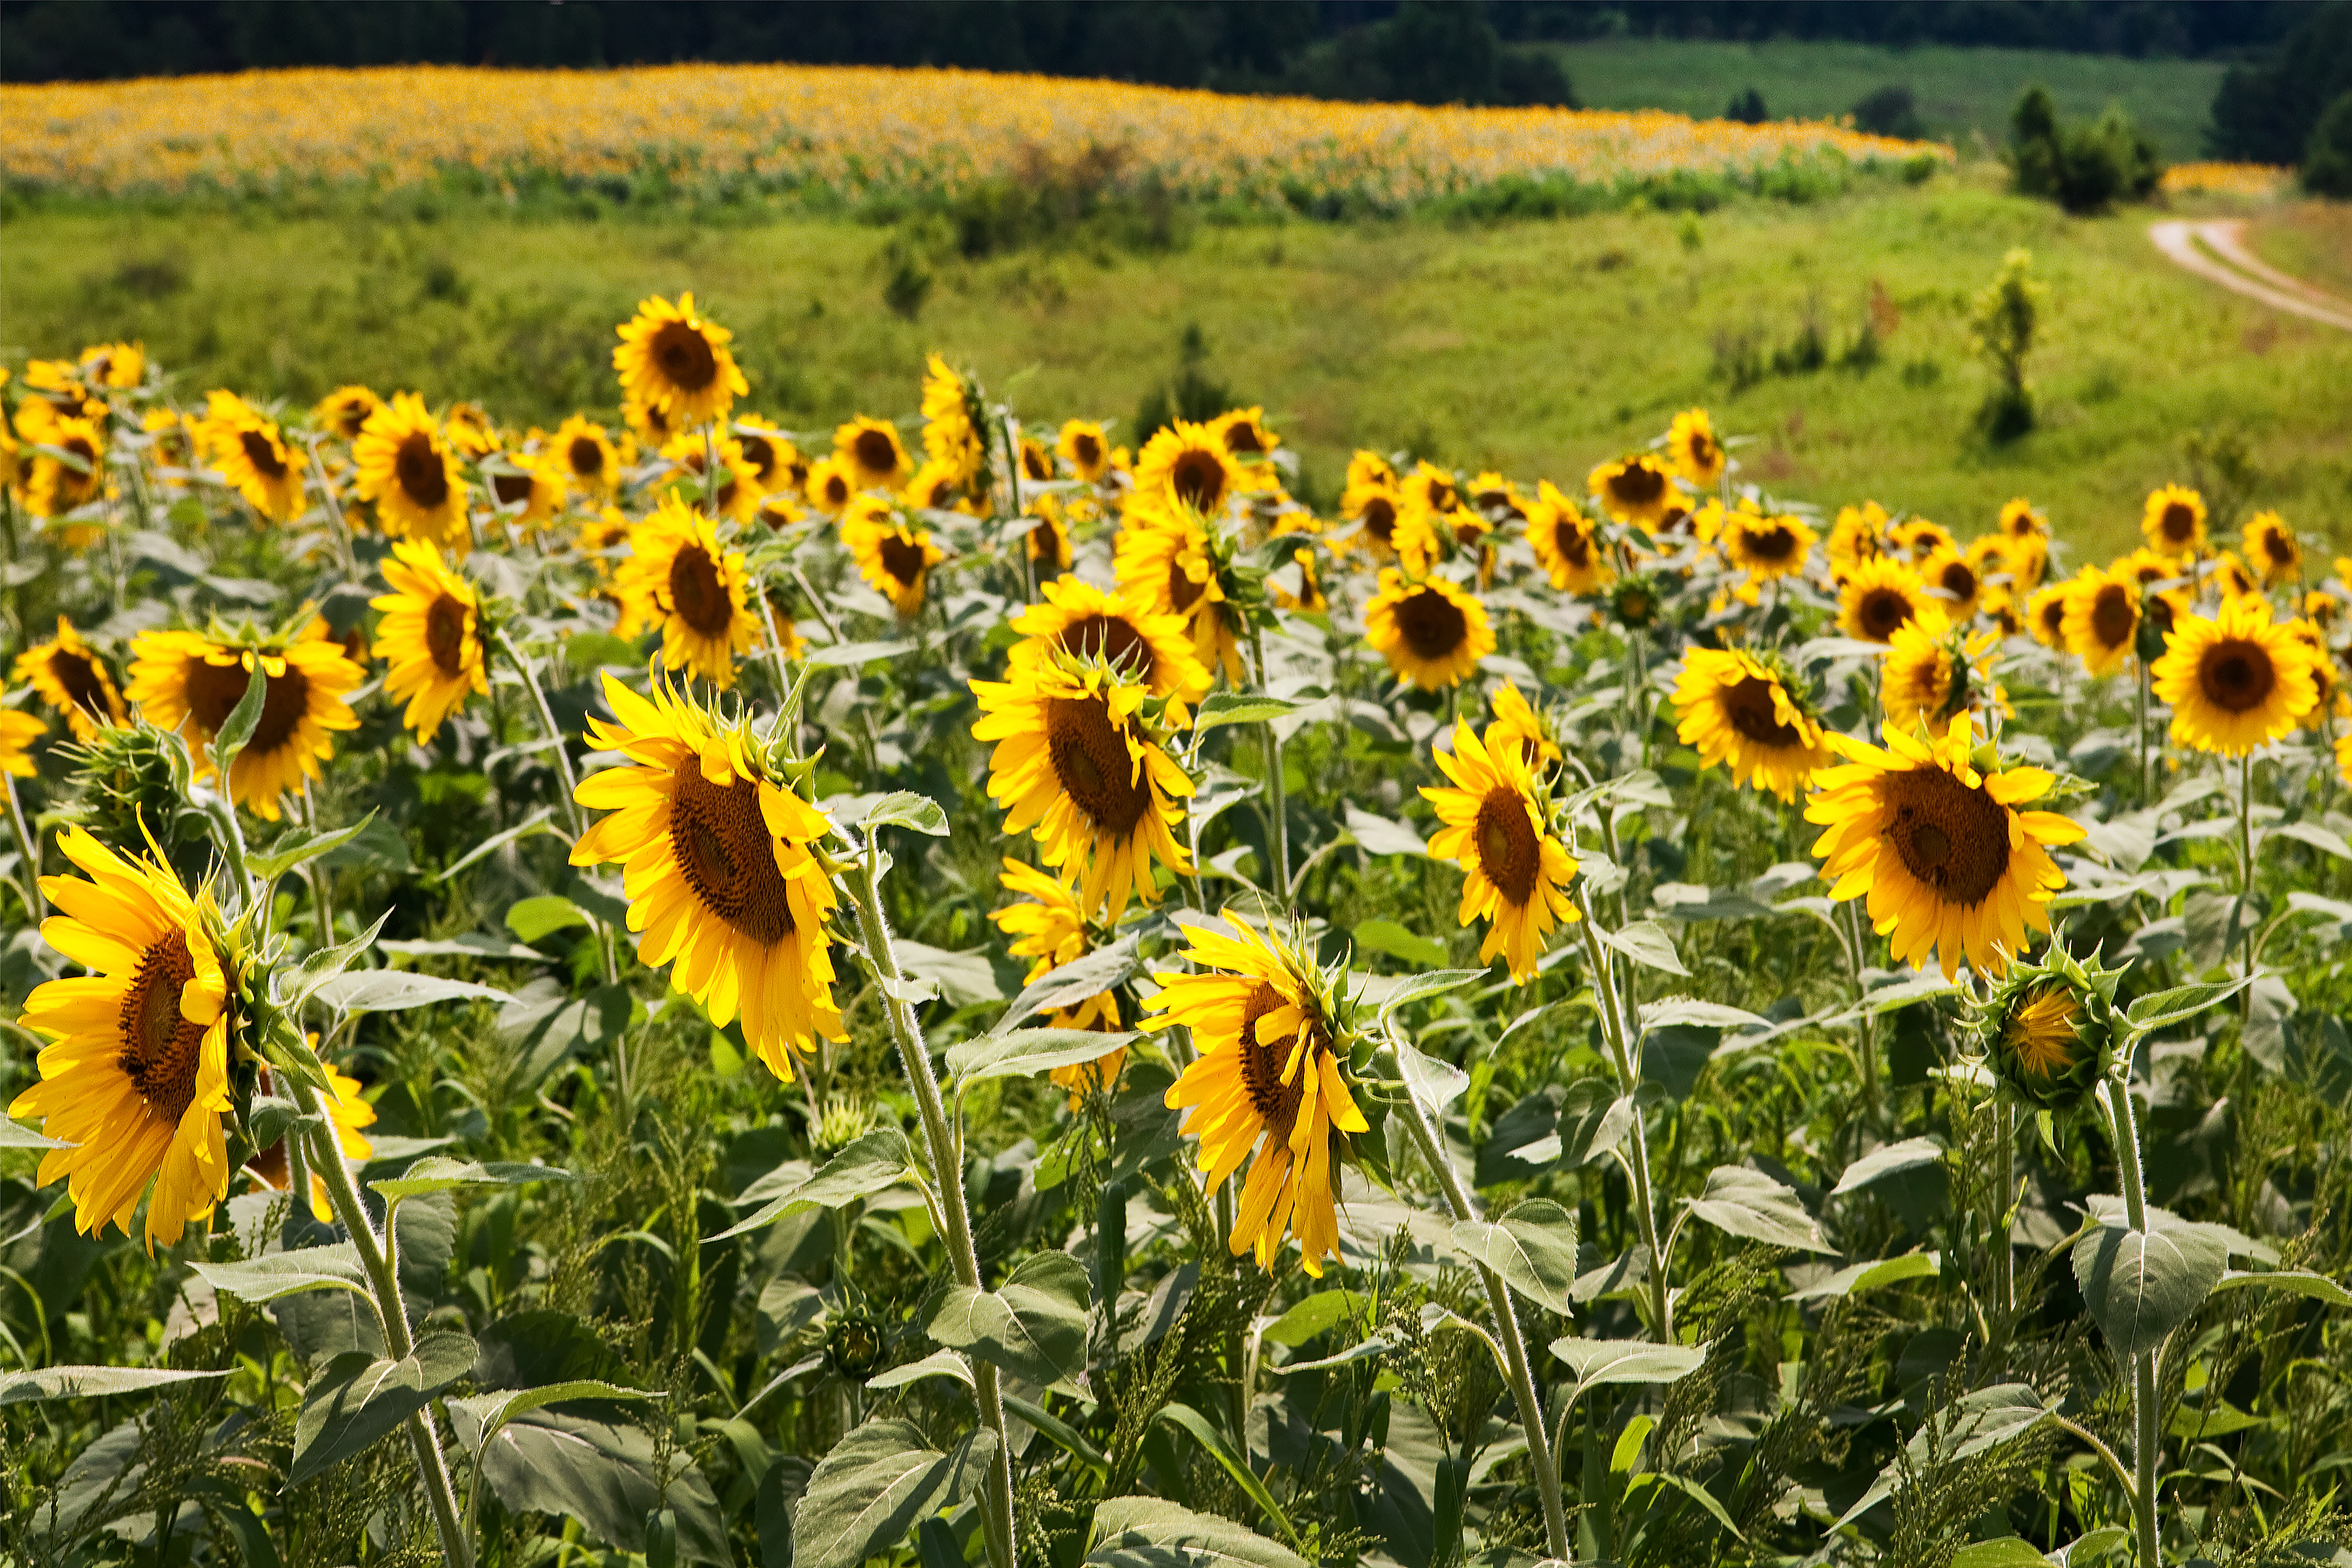 A field of Helianthus annuus, or common sunflowers, is grown for oils and seeds. Domesticated in America, the flowered stem follows the path of the sun during the day. The face of the flower head also follows Fibonacci numbers, allowing the most seeds mathematically to fit in the flower head. 
